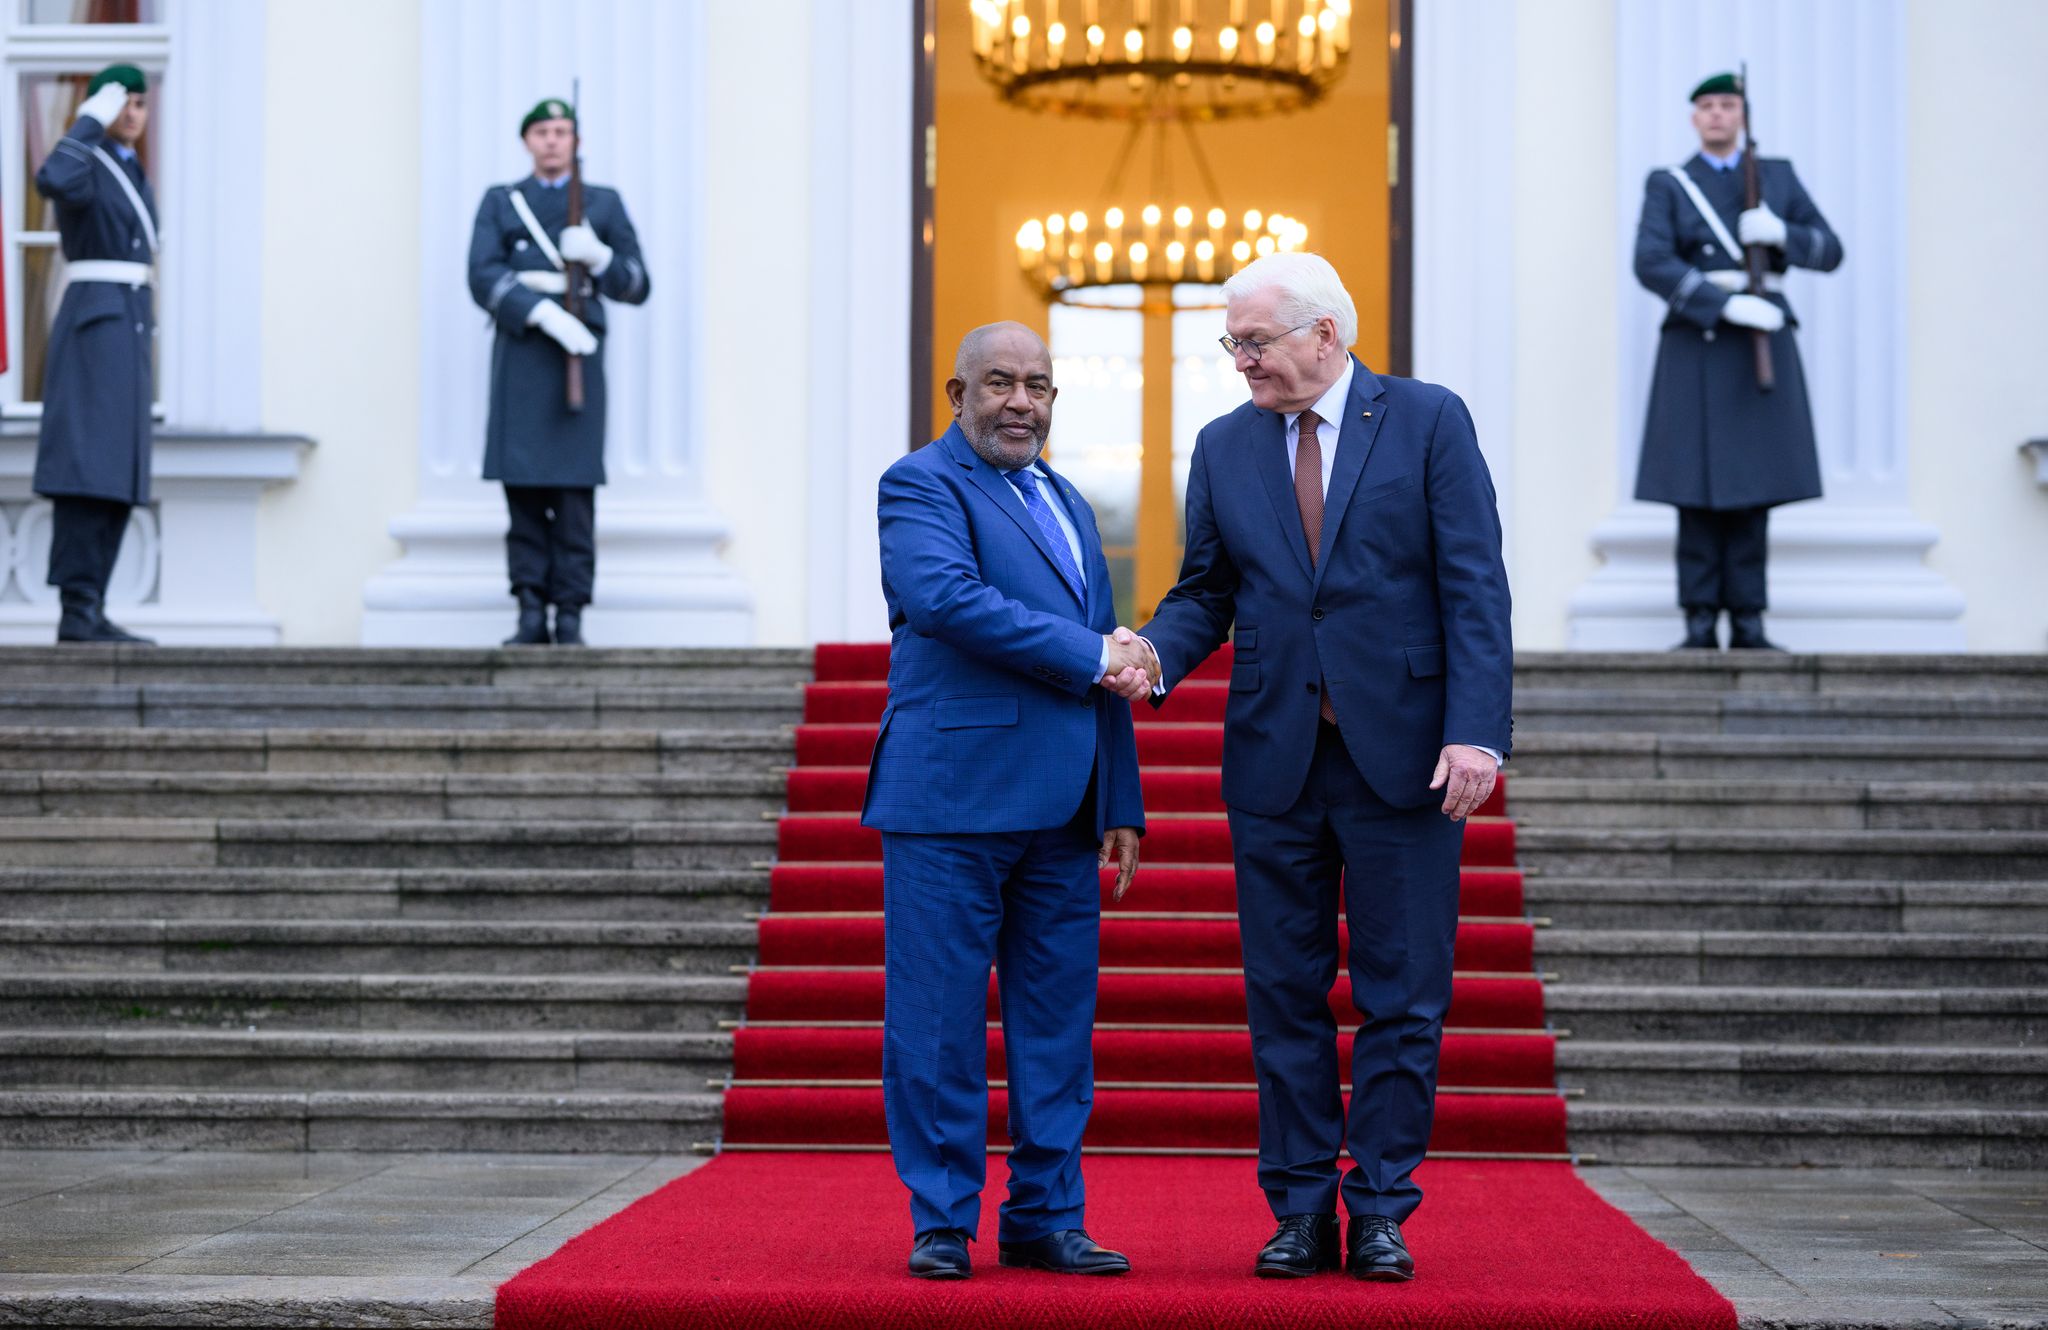 German President Frank-Walter Steinmeier welcomes Assoumani Azali, Chairman of the African Union and President of the Comoros, at the "G20 Investment Summit 2023 - Compact with Africa" conference at Schloss Bellevue. Steinmeier invited the heads of state and government of the G20 Compact with Africa countries to a lunch to strengthen the framework conditions for sustainable investment in Africa.Credit: Bernd von Jutrczenka/dpa